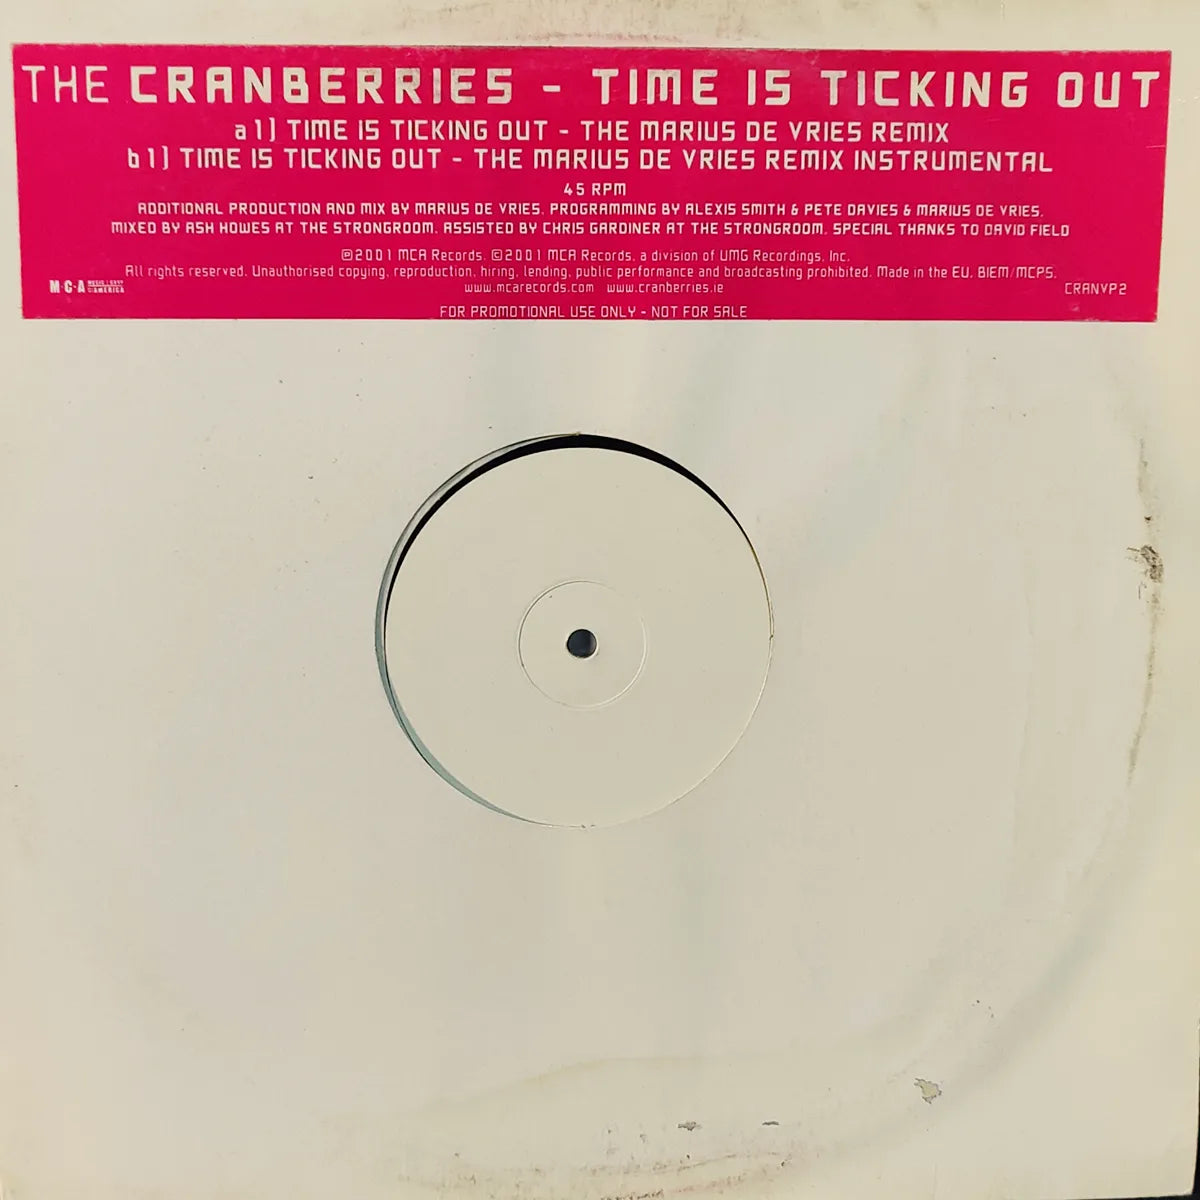 The Cranberries – Time Is Ticking Out 